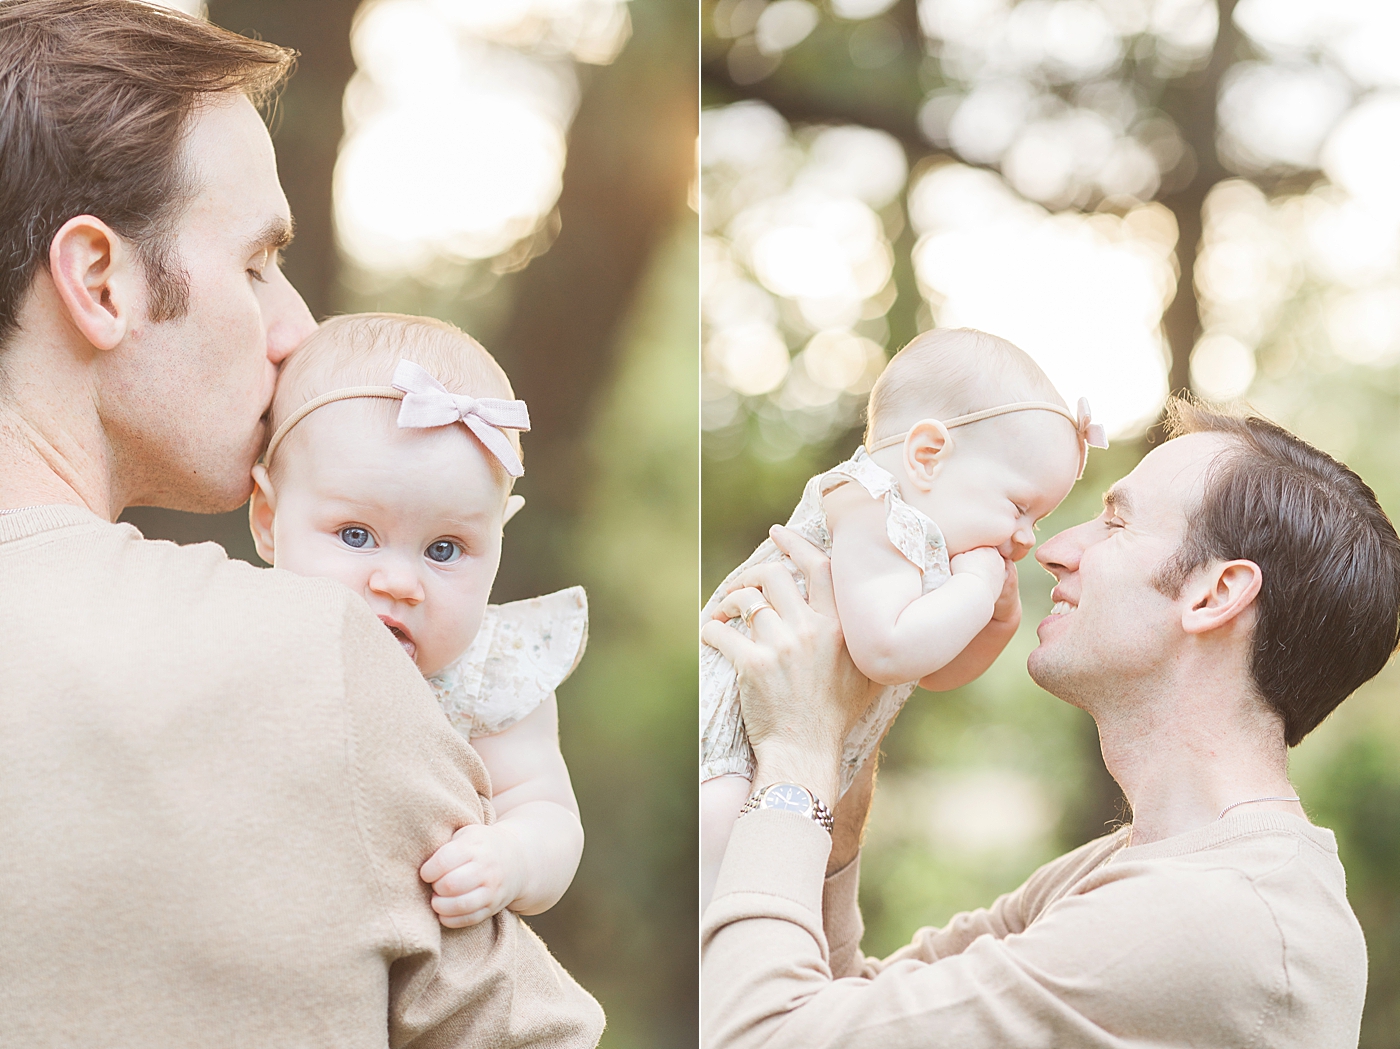 Sweet moments between Dad and his daughter during her six month milestone session with The Heights Photographer, Fresh Light Photography.